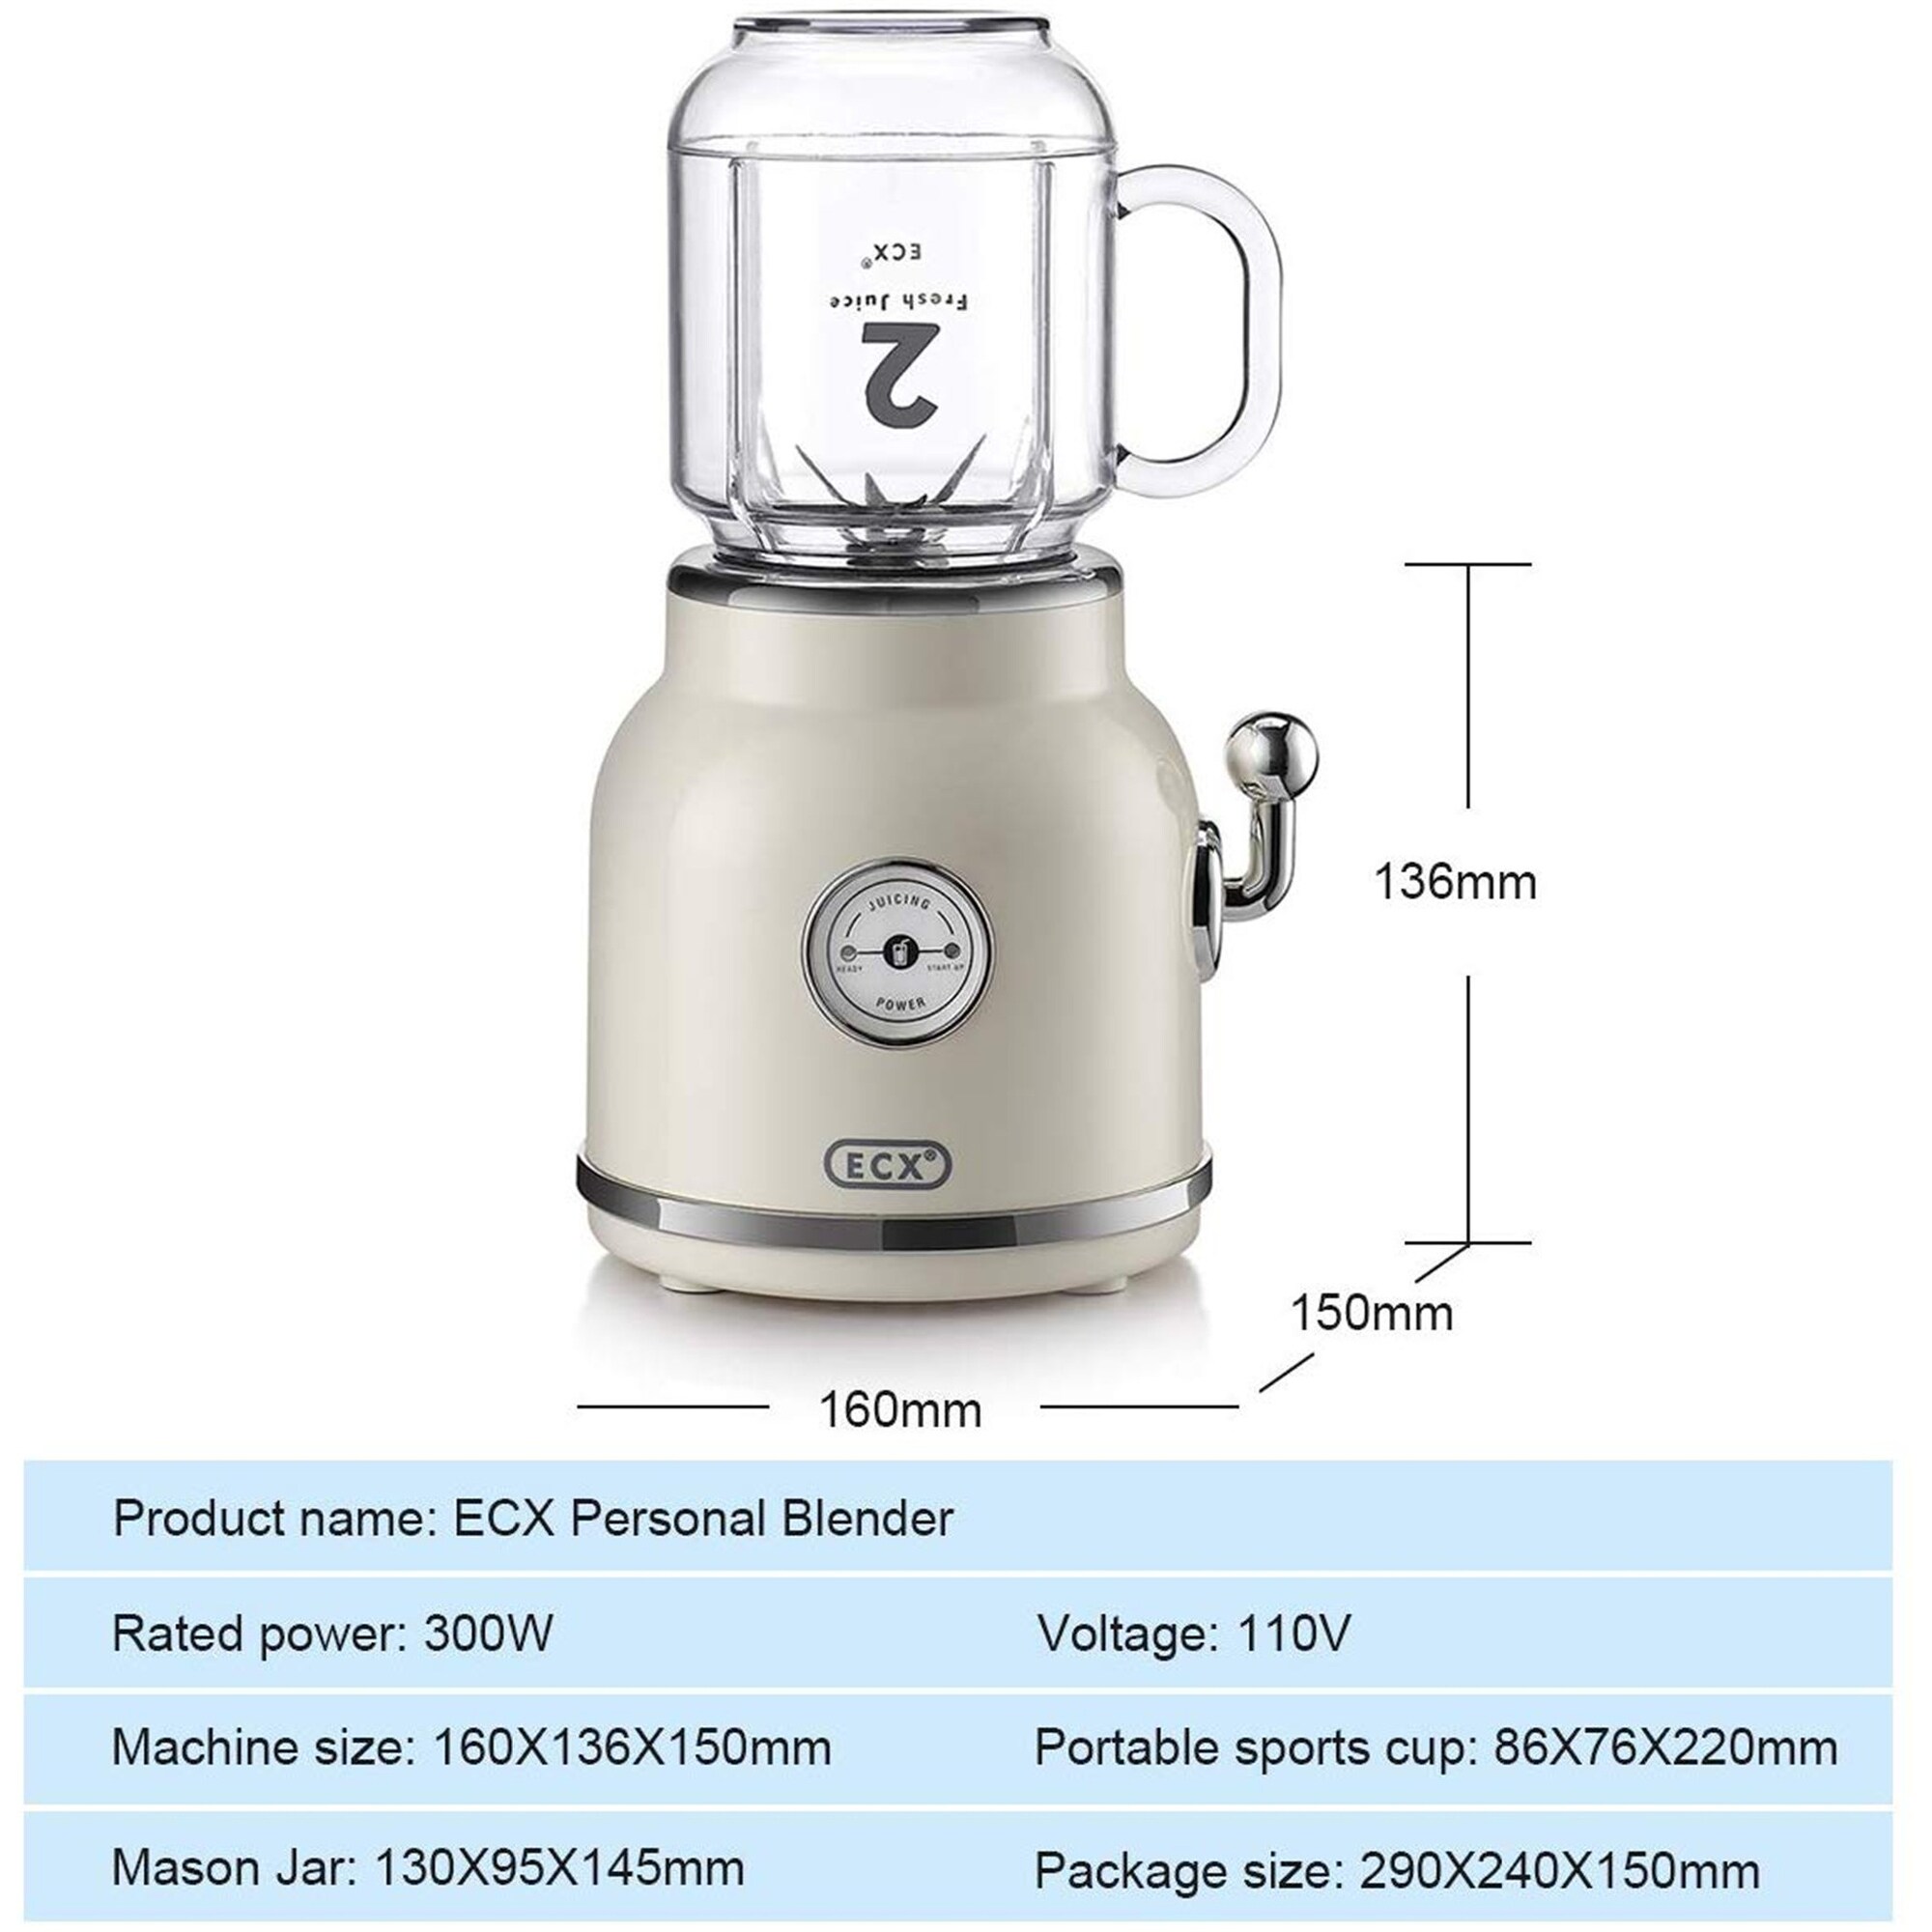 https://ak1.ostkcdn.com/images/products/is/images/direct/fd4d598771b76d159f9cd813facee7691e351b11/Homeleader-Juicer-Juice-Extractor-3-Speed-Centrifugal-Juicer-with-Wide-Mouth%2C-for-Fruits-and-Vegetables%2C-BPA-Free.jpg